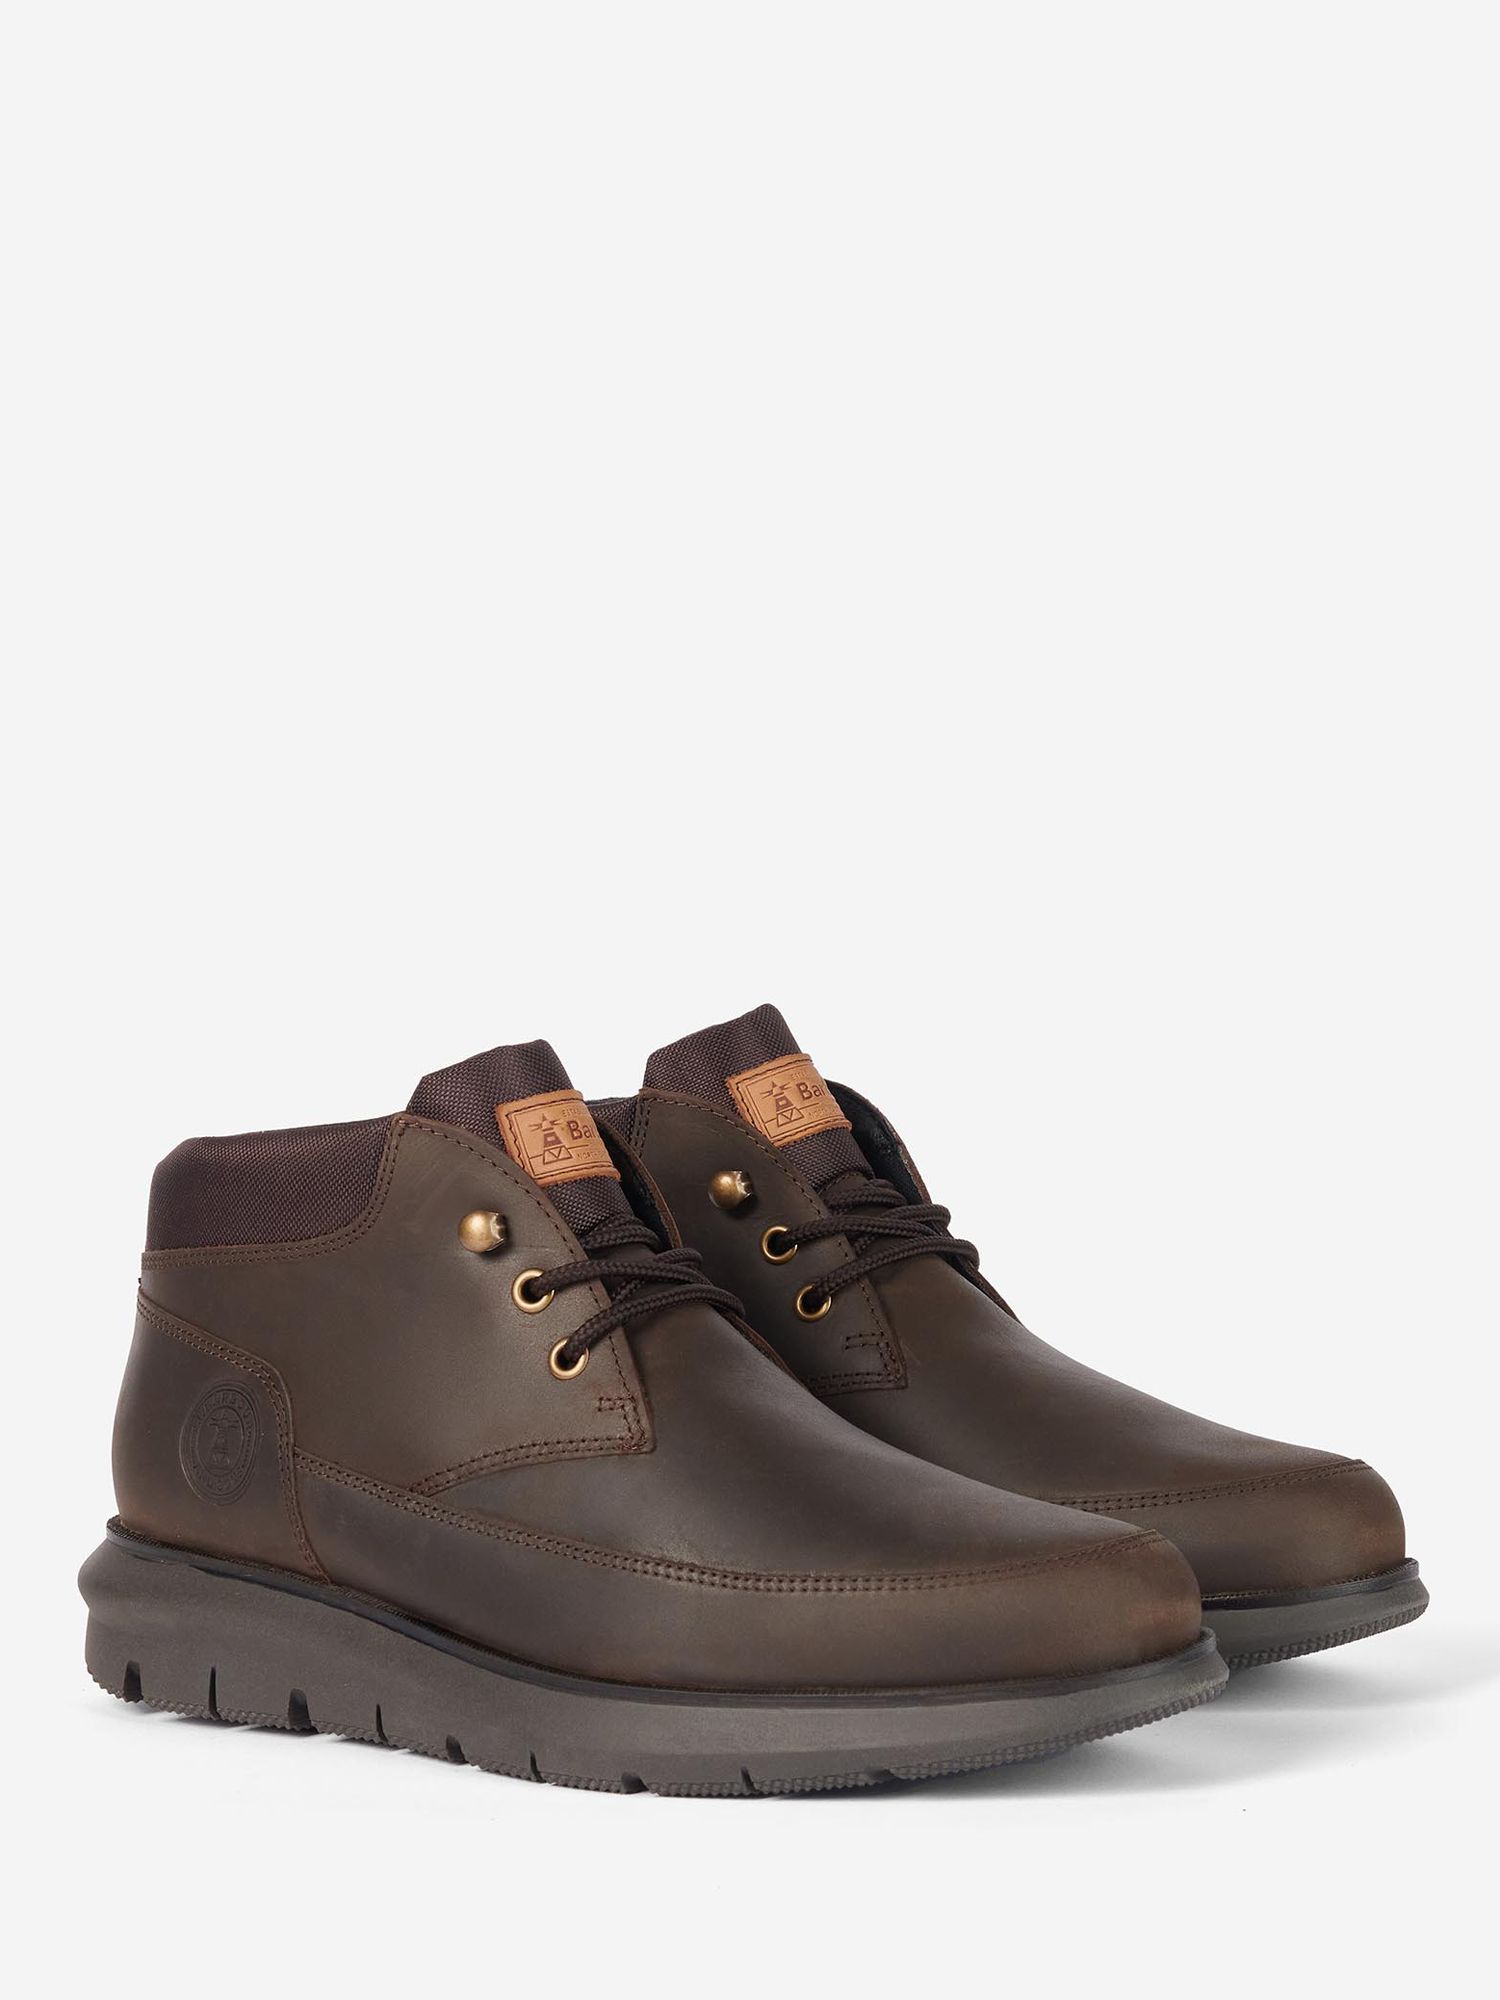 Barbour Morton Leather Blend Chukka Boots, Chocolate